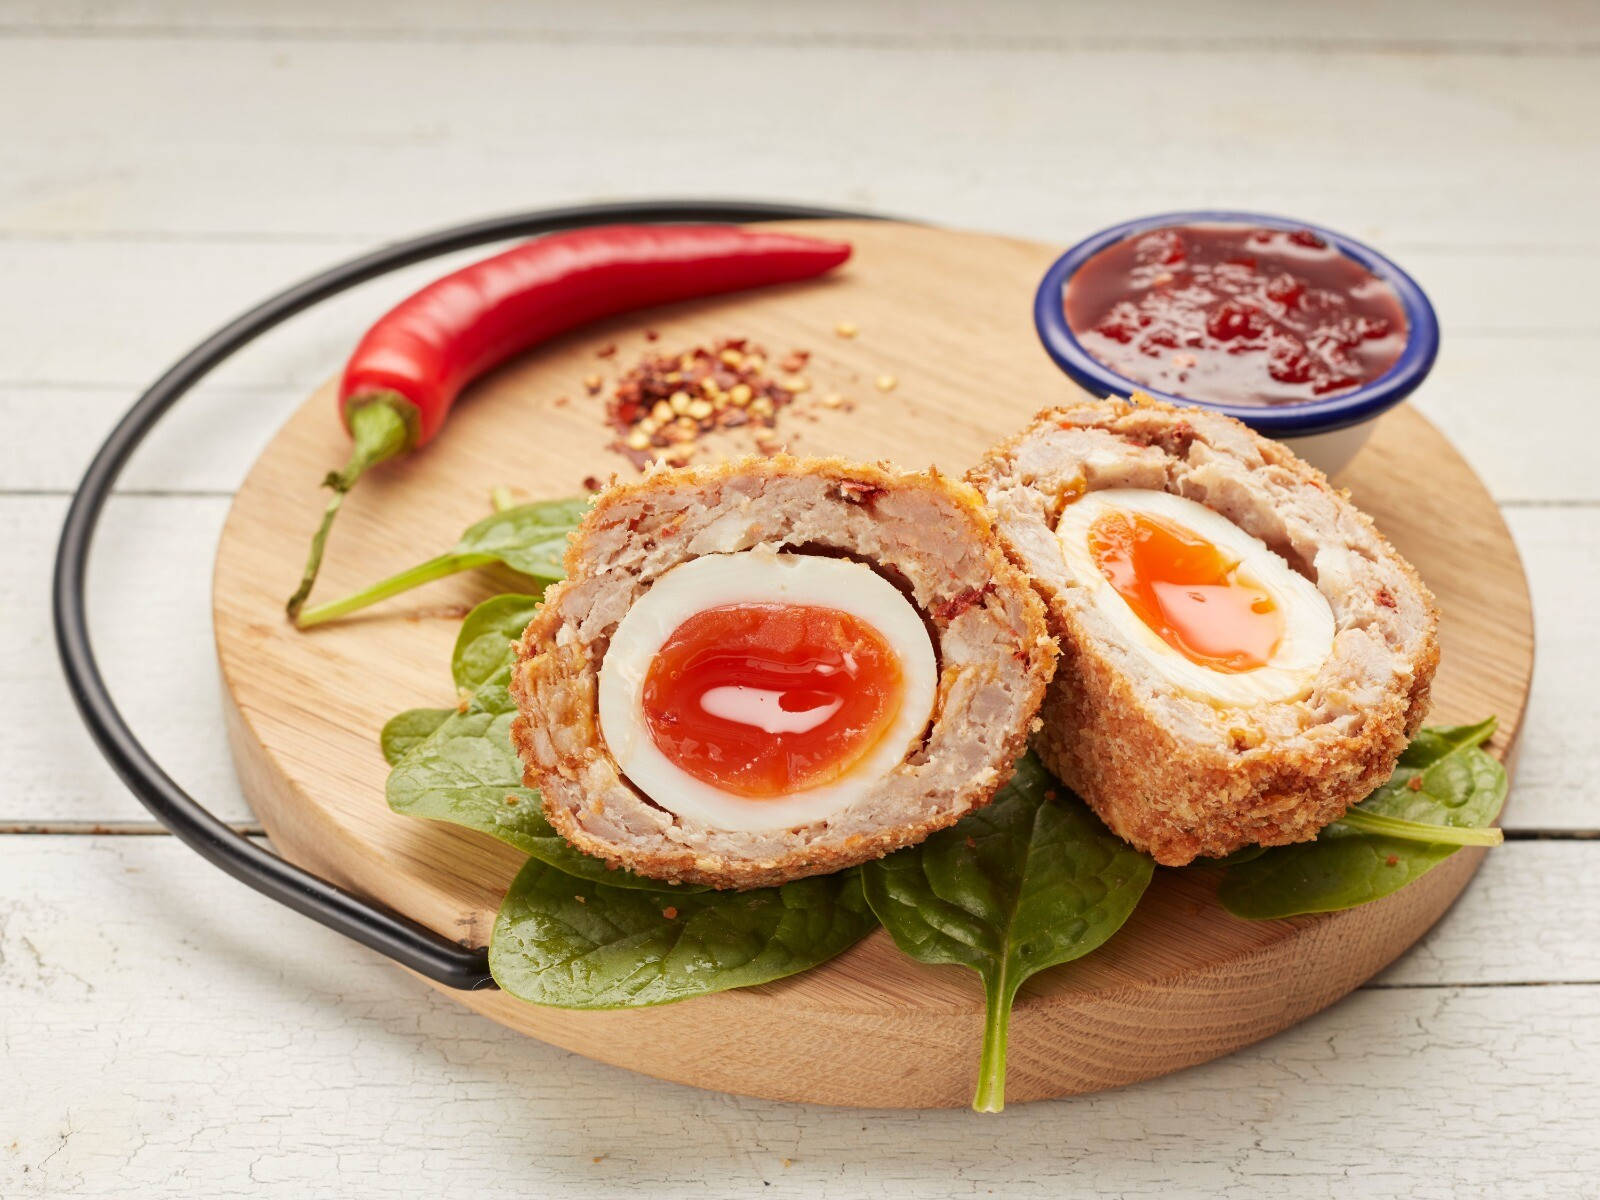 Scotch Egg Dish With Spinach And Chili Sauce Wallpaper